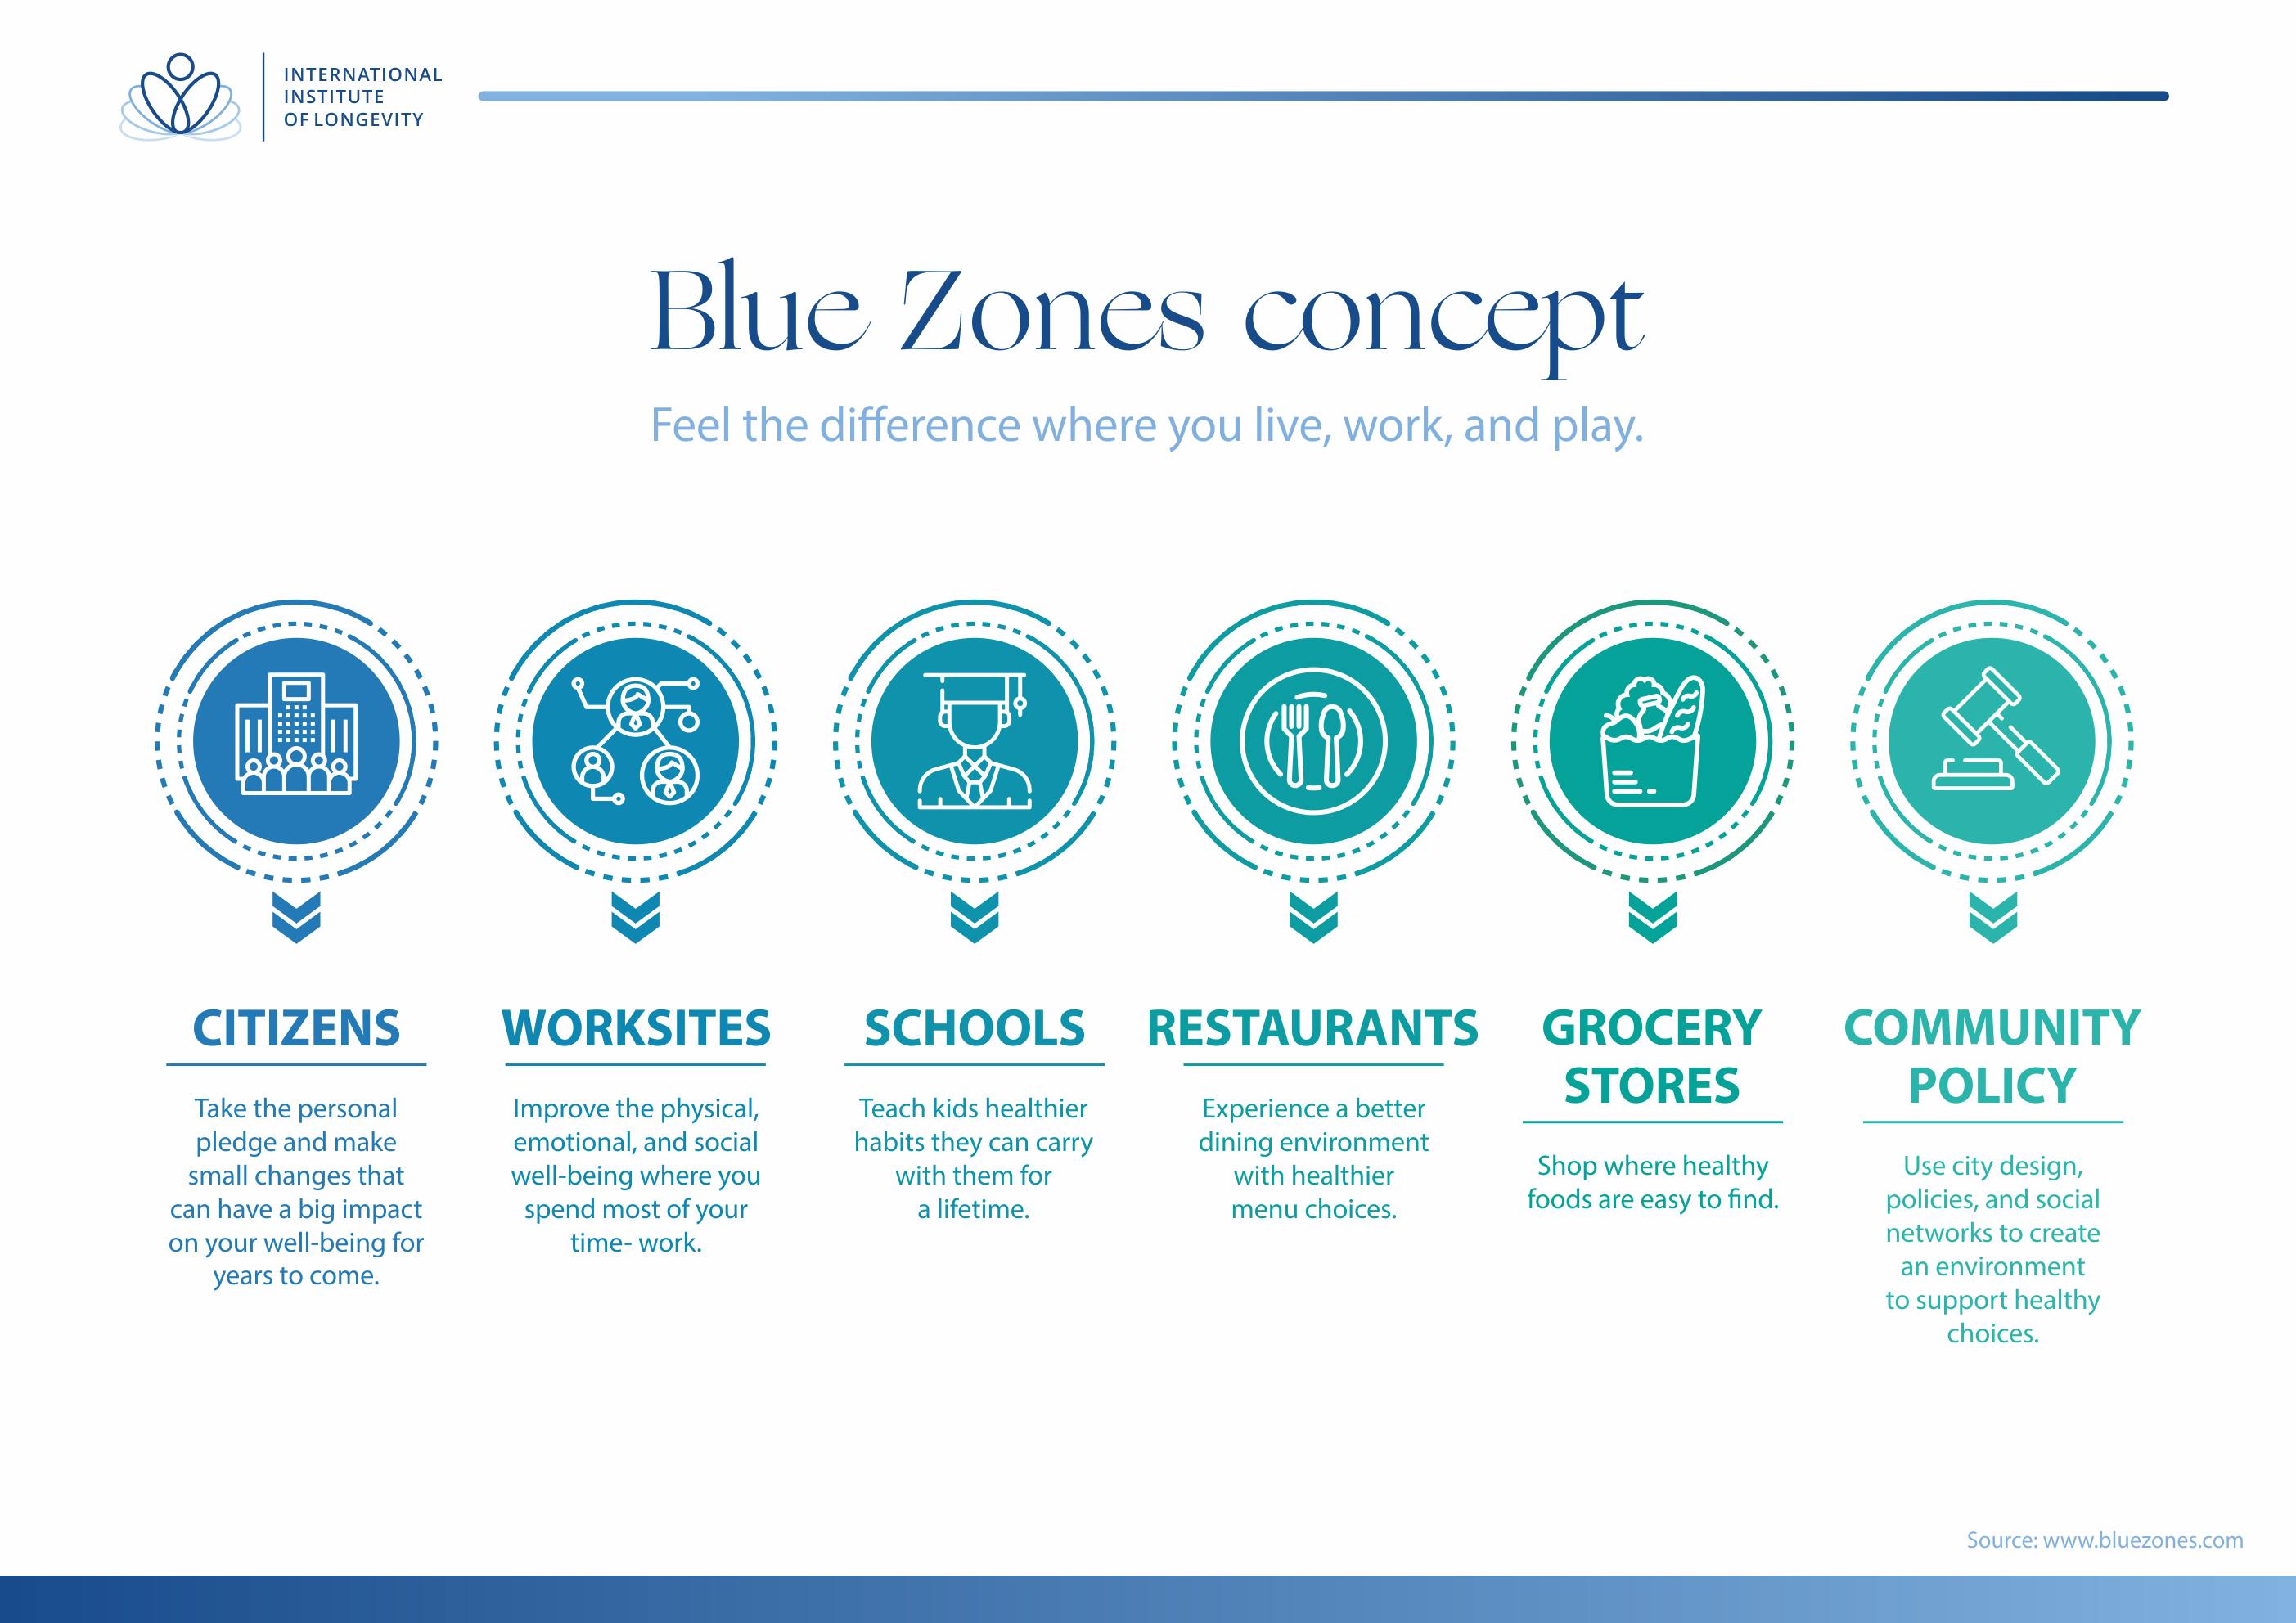 the blue zone research supports the concept that